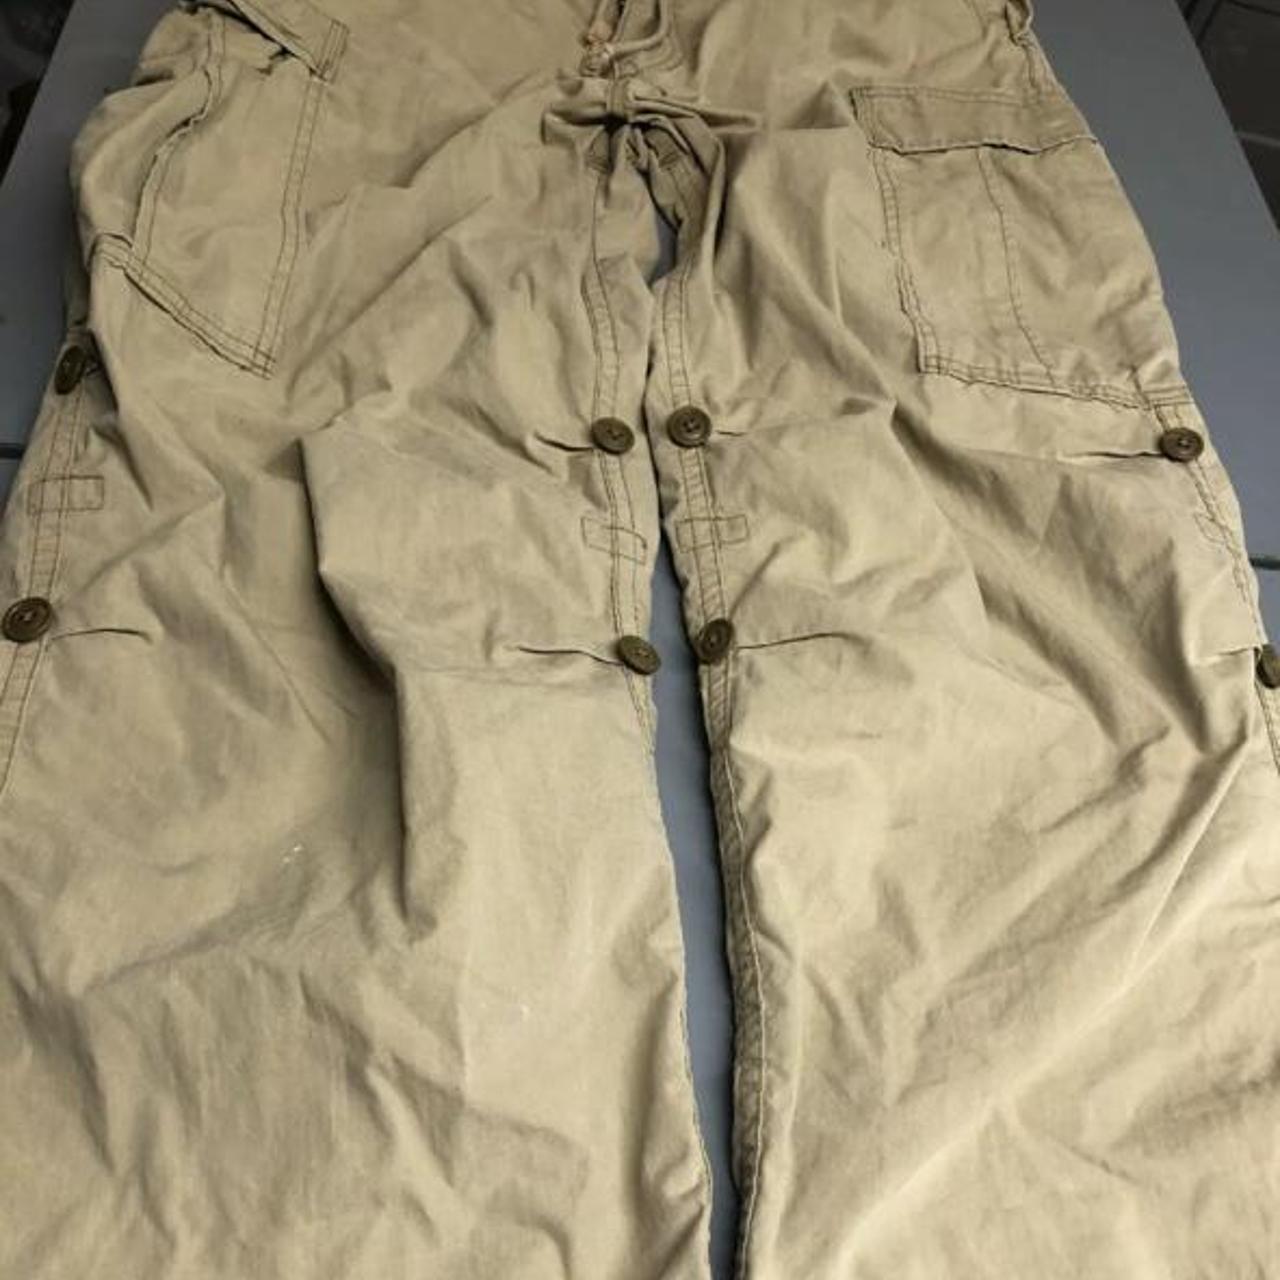 Product Image 3 - Abercrombie & Fitch Cargo Pants/Military